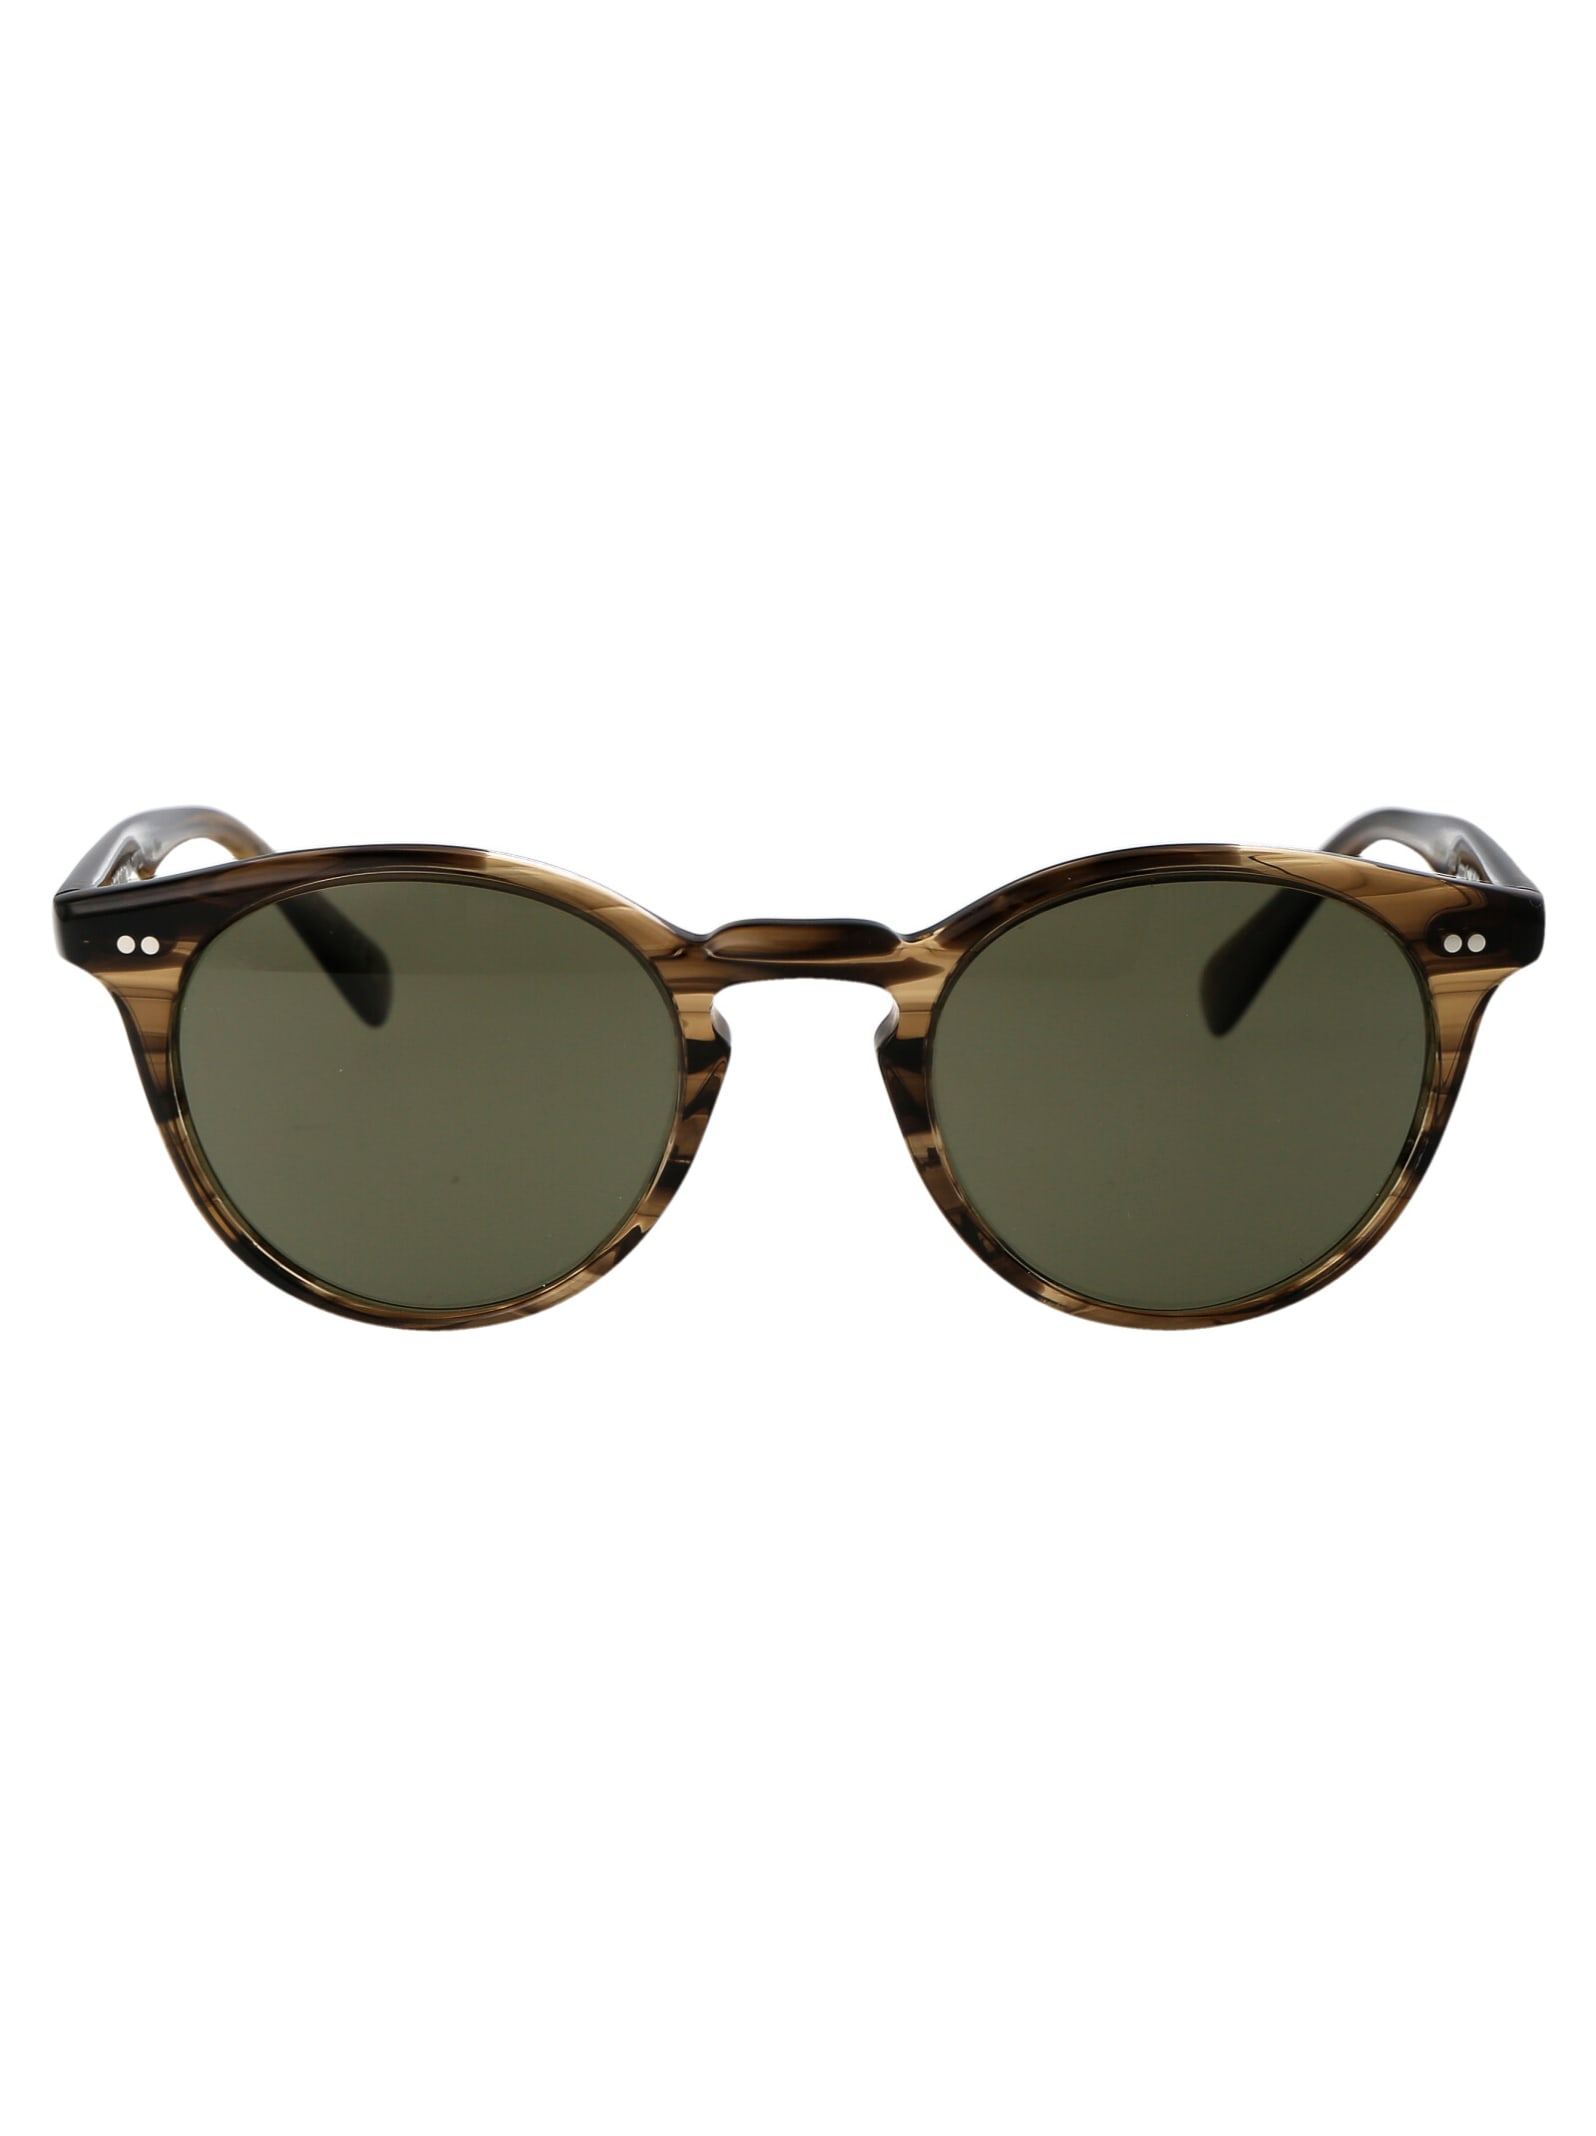 Oliver Peoples Romare Sun Sunglasses In 179152 Olive Smoke